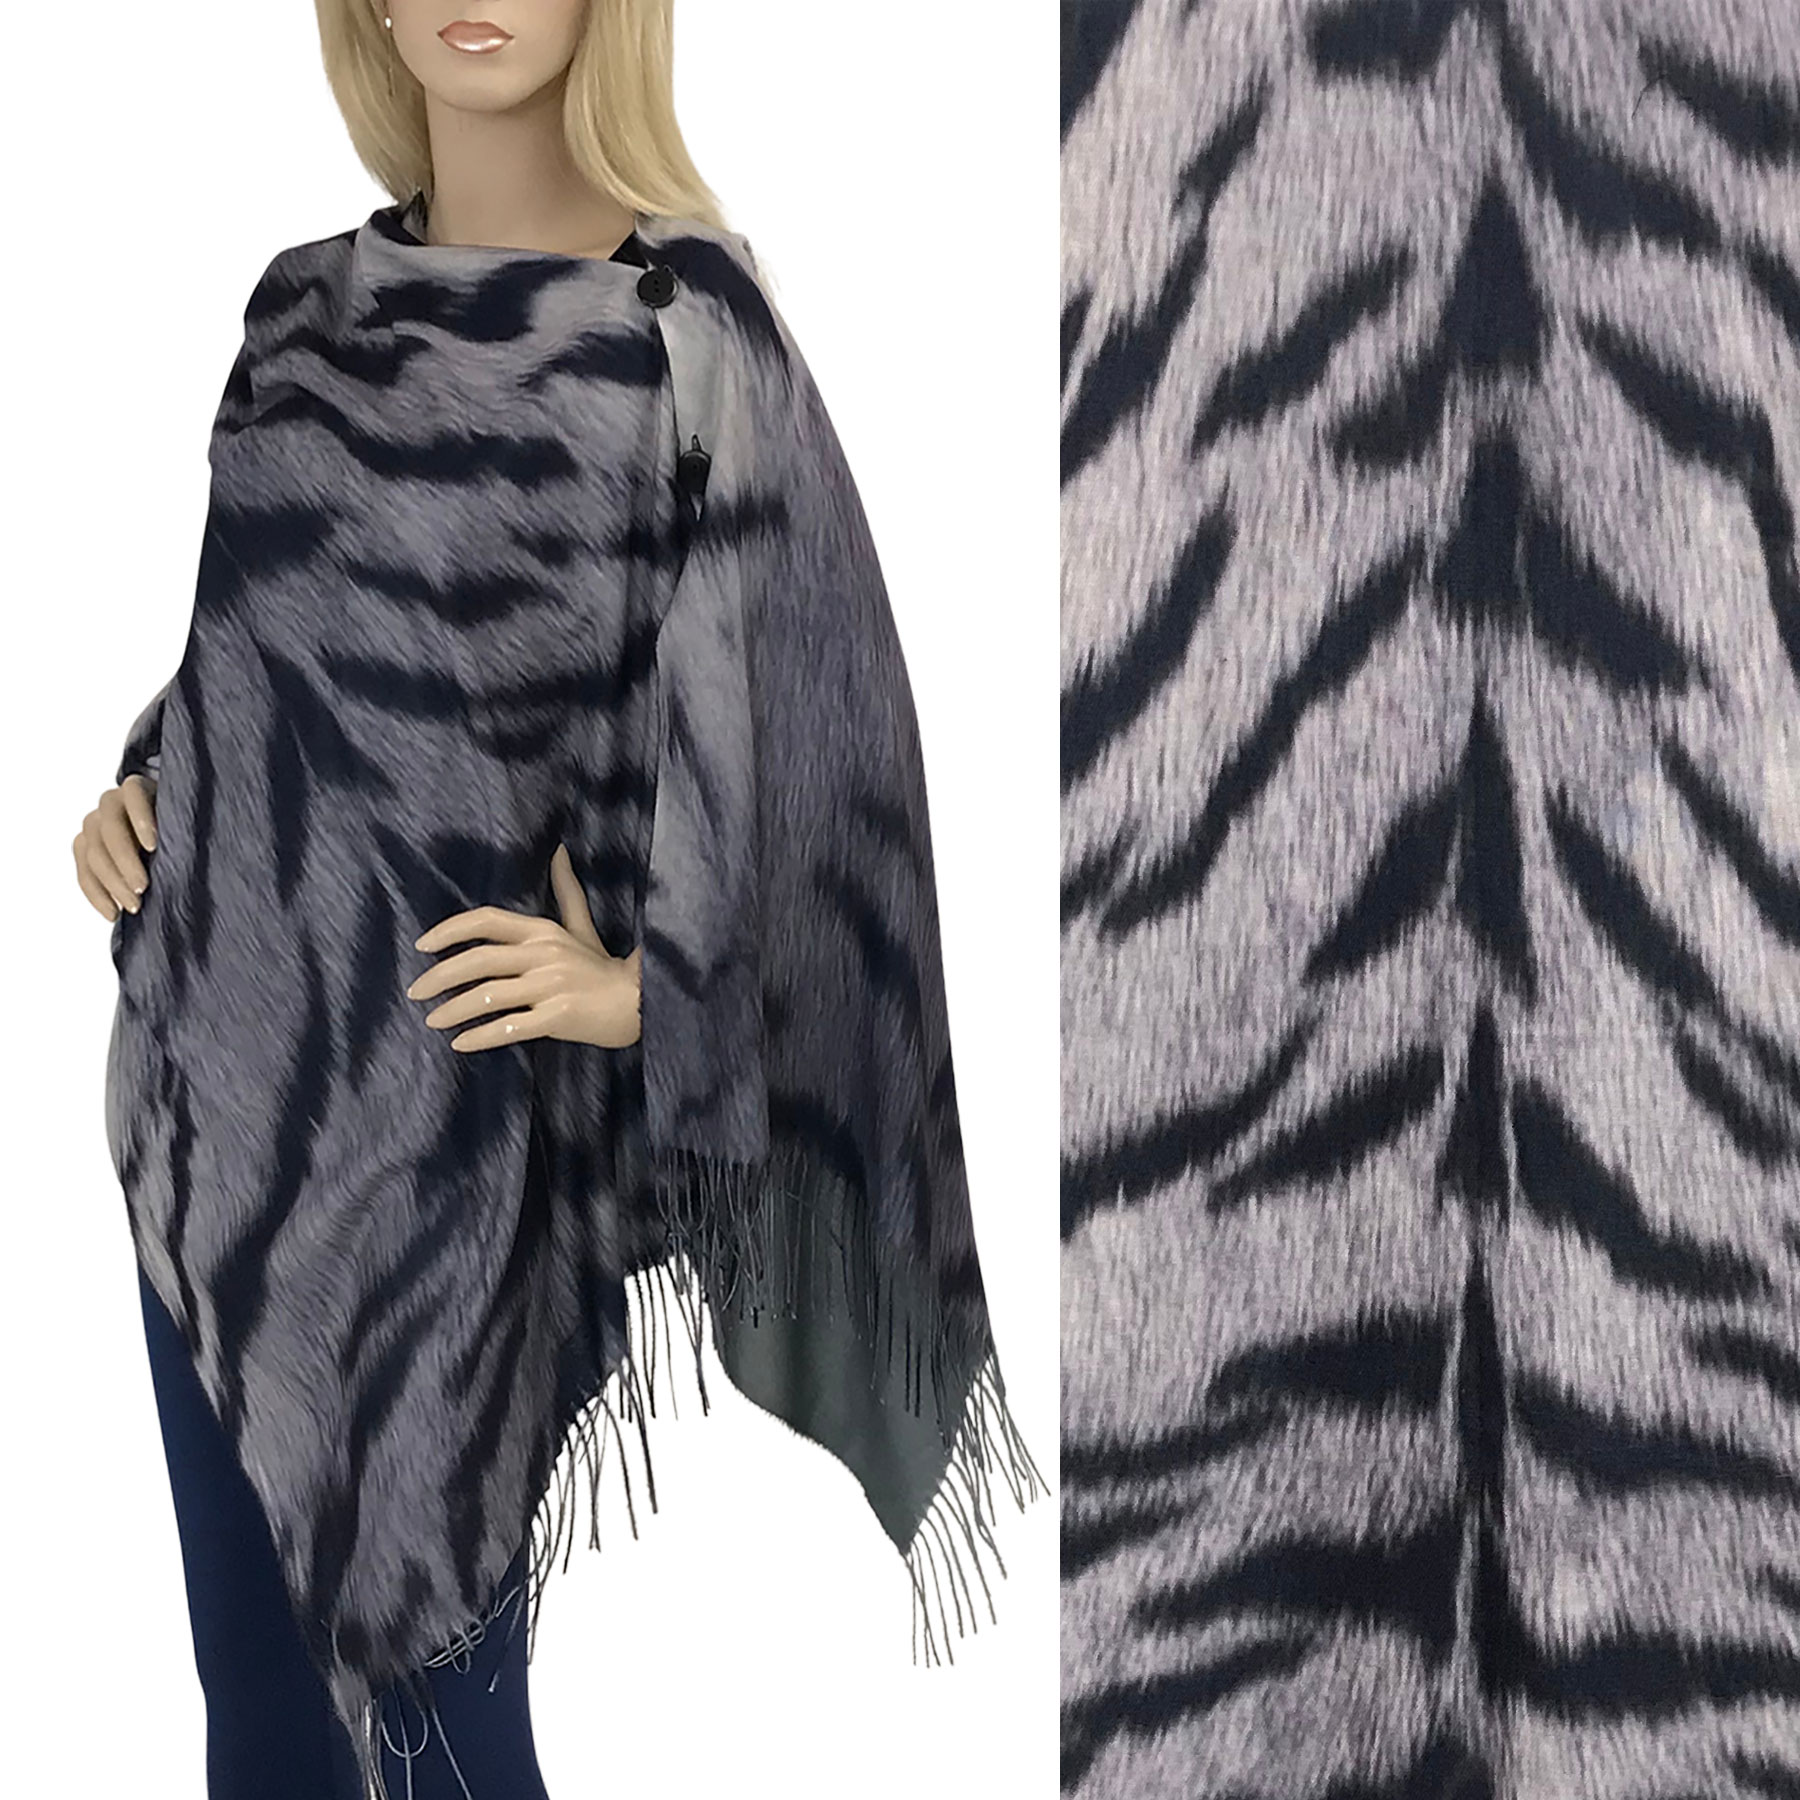 3305 - Suede Cloth Animal Print Button Shawl FANTASY TIGER  MIDNIGHT/GREY Suede Cloth Animal Print Shawl with Buttons  - 